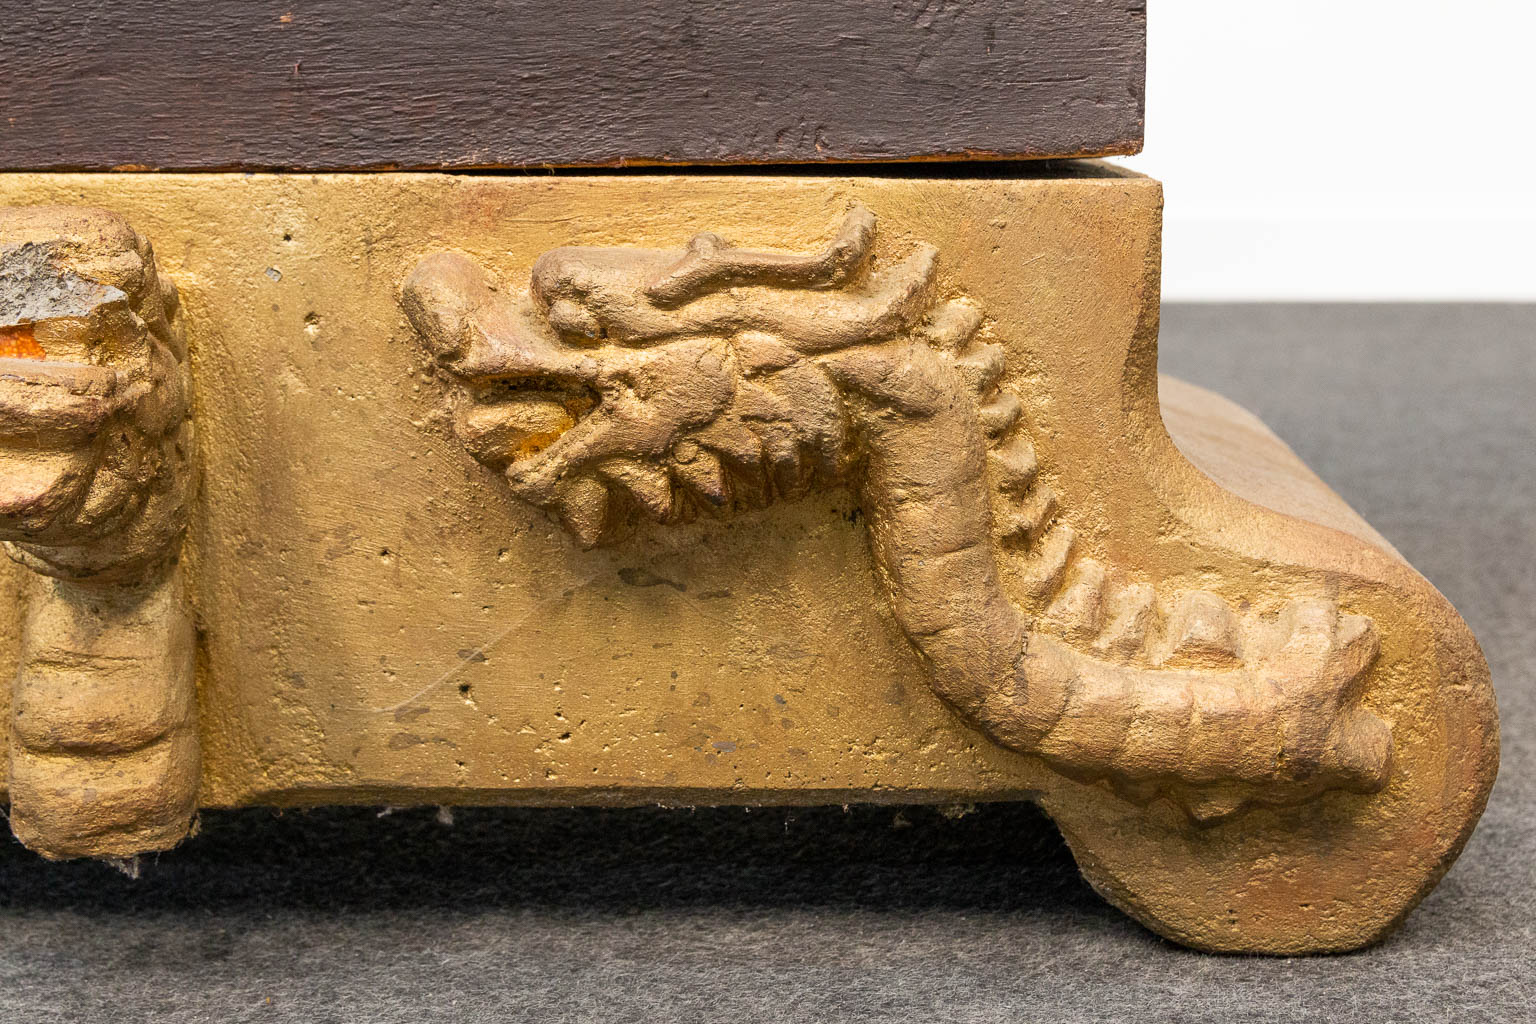 A Xylophone made of sculptured wood in the shape of a dragon and standing on a stone base. Indonesia, 20th century. (H:138cm)